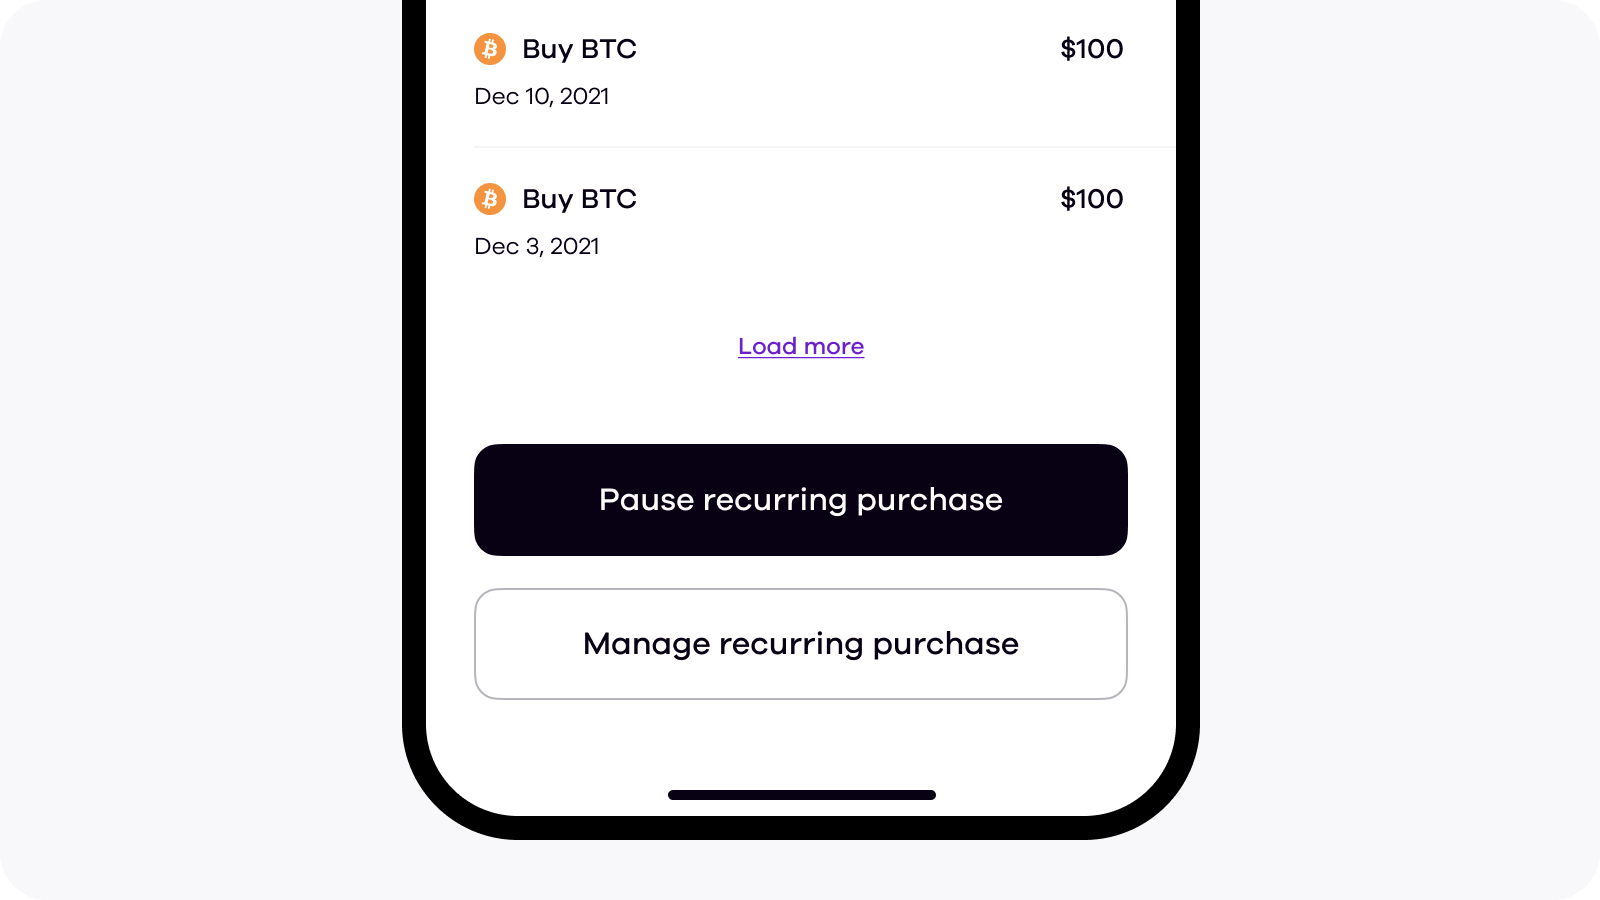 Okcoin app recurring purchase details, history, pause, and manage buttons